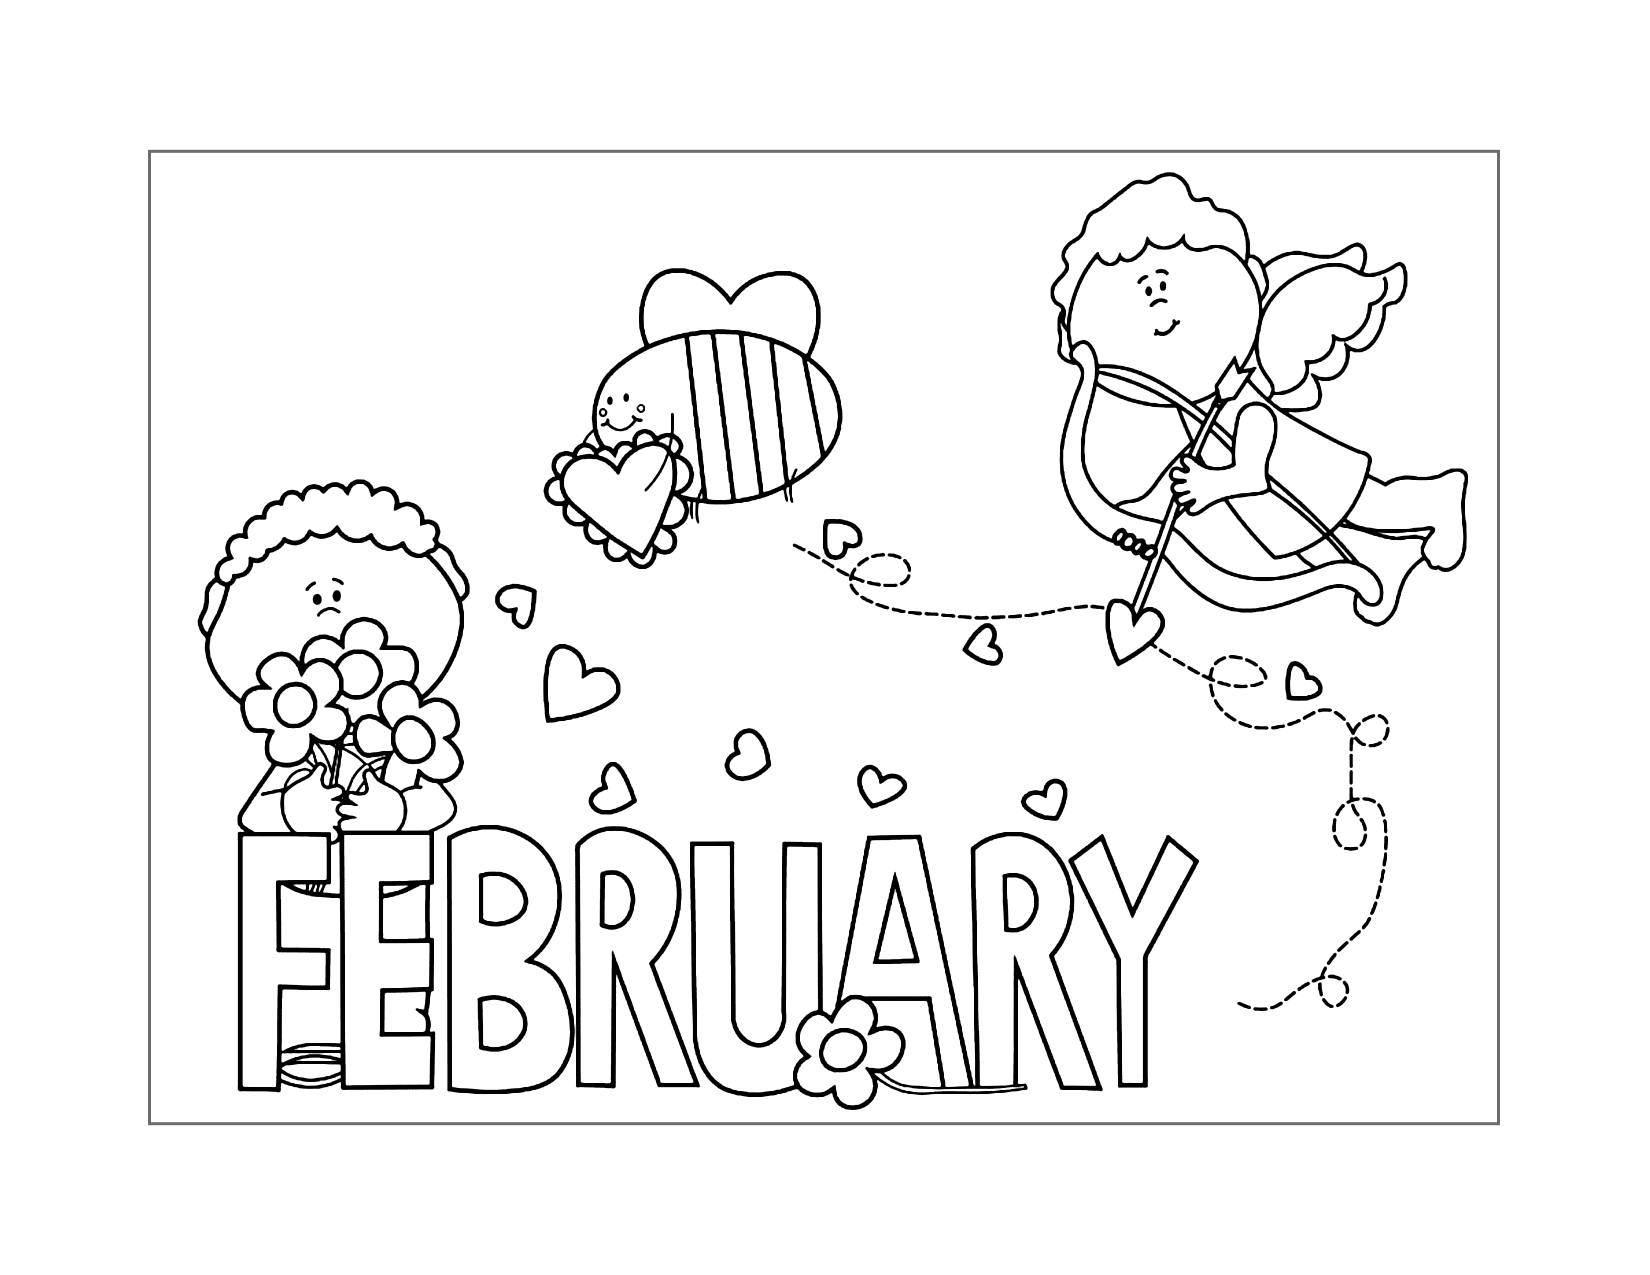 February Cupid Coloring Page